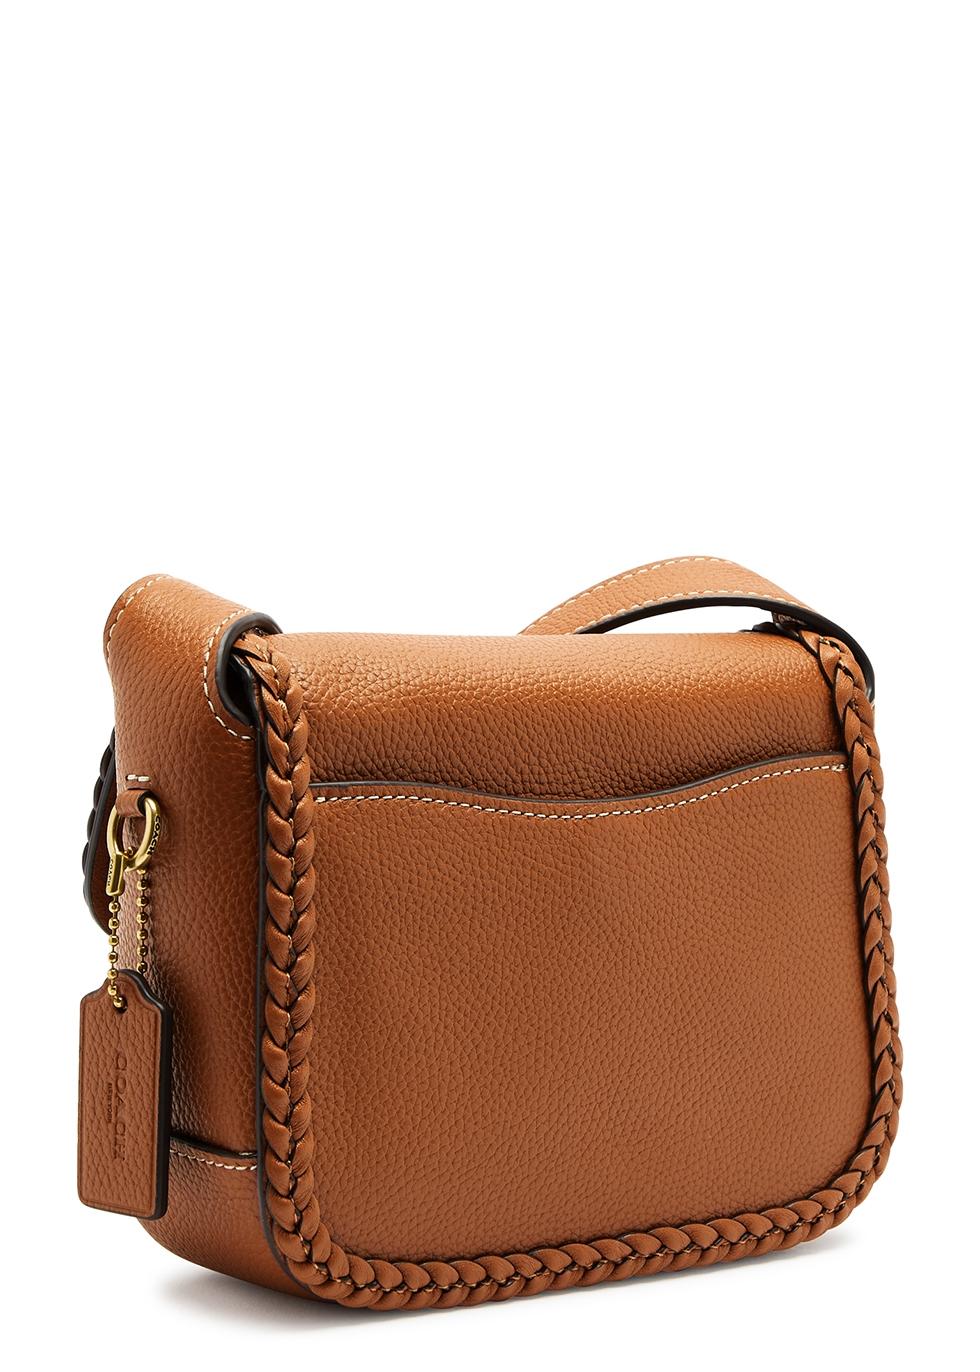 COACH Tabby Messenger 19 Leather Cross-body Bag in Brown | Lyst